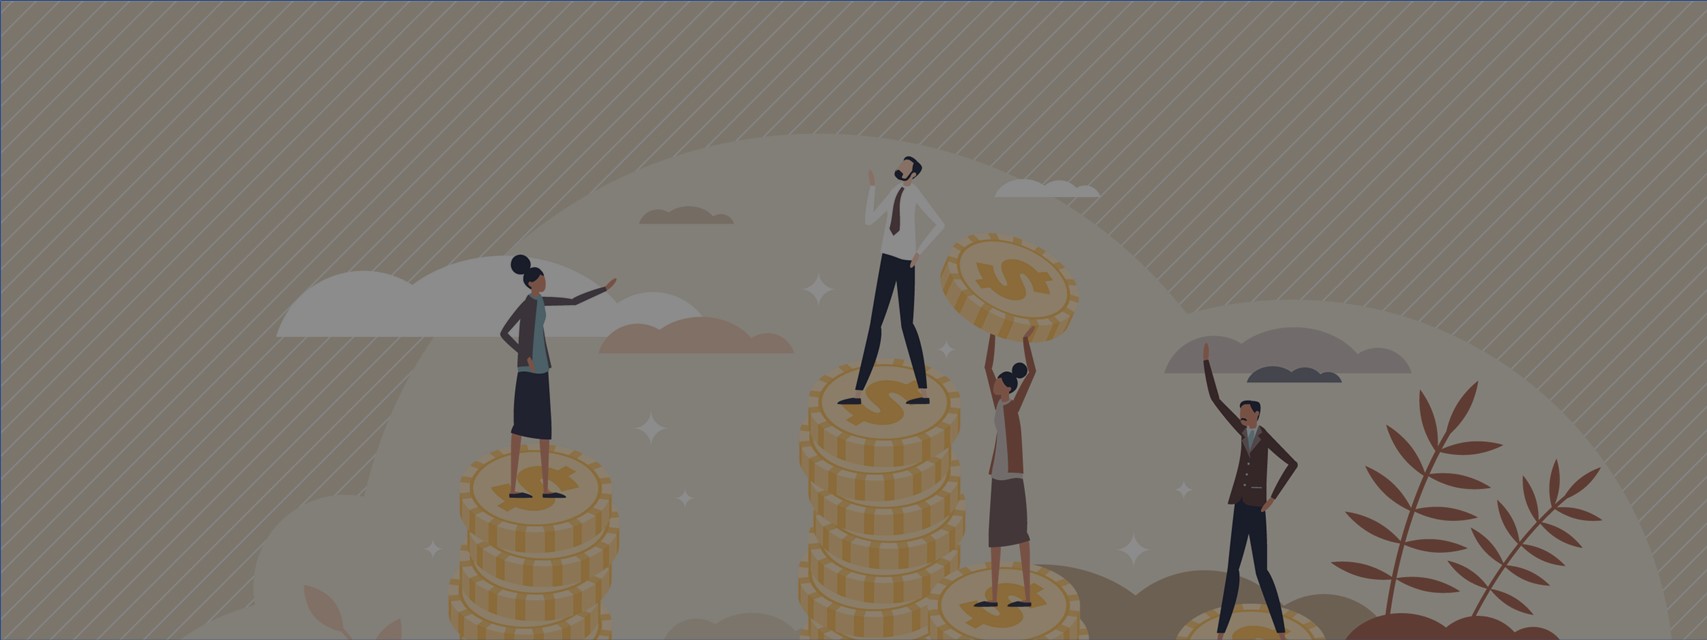 Drawing of people of different races and genders standing on stacks of coins